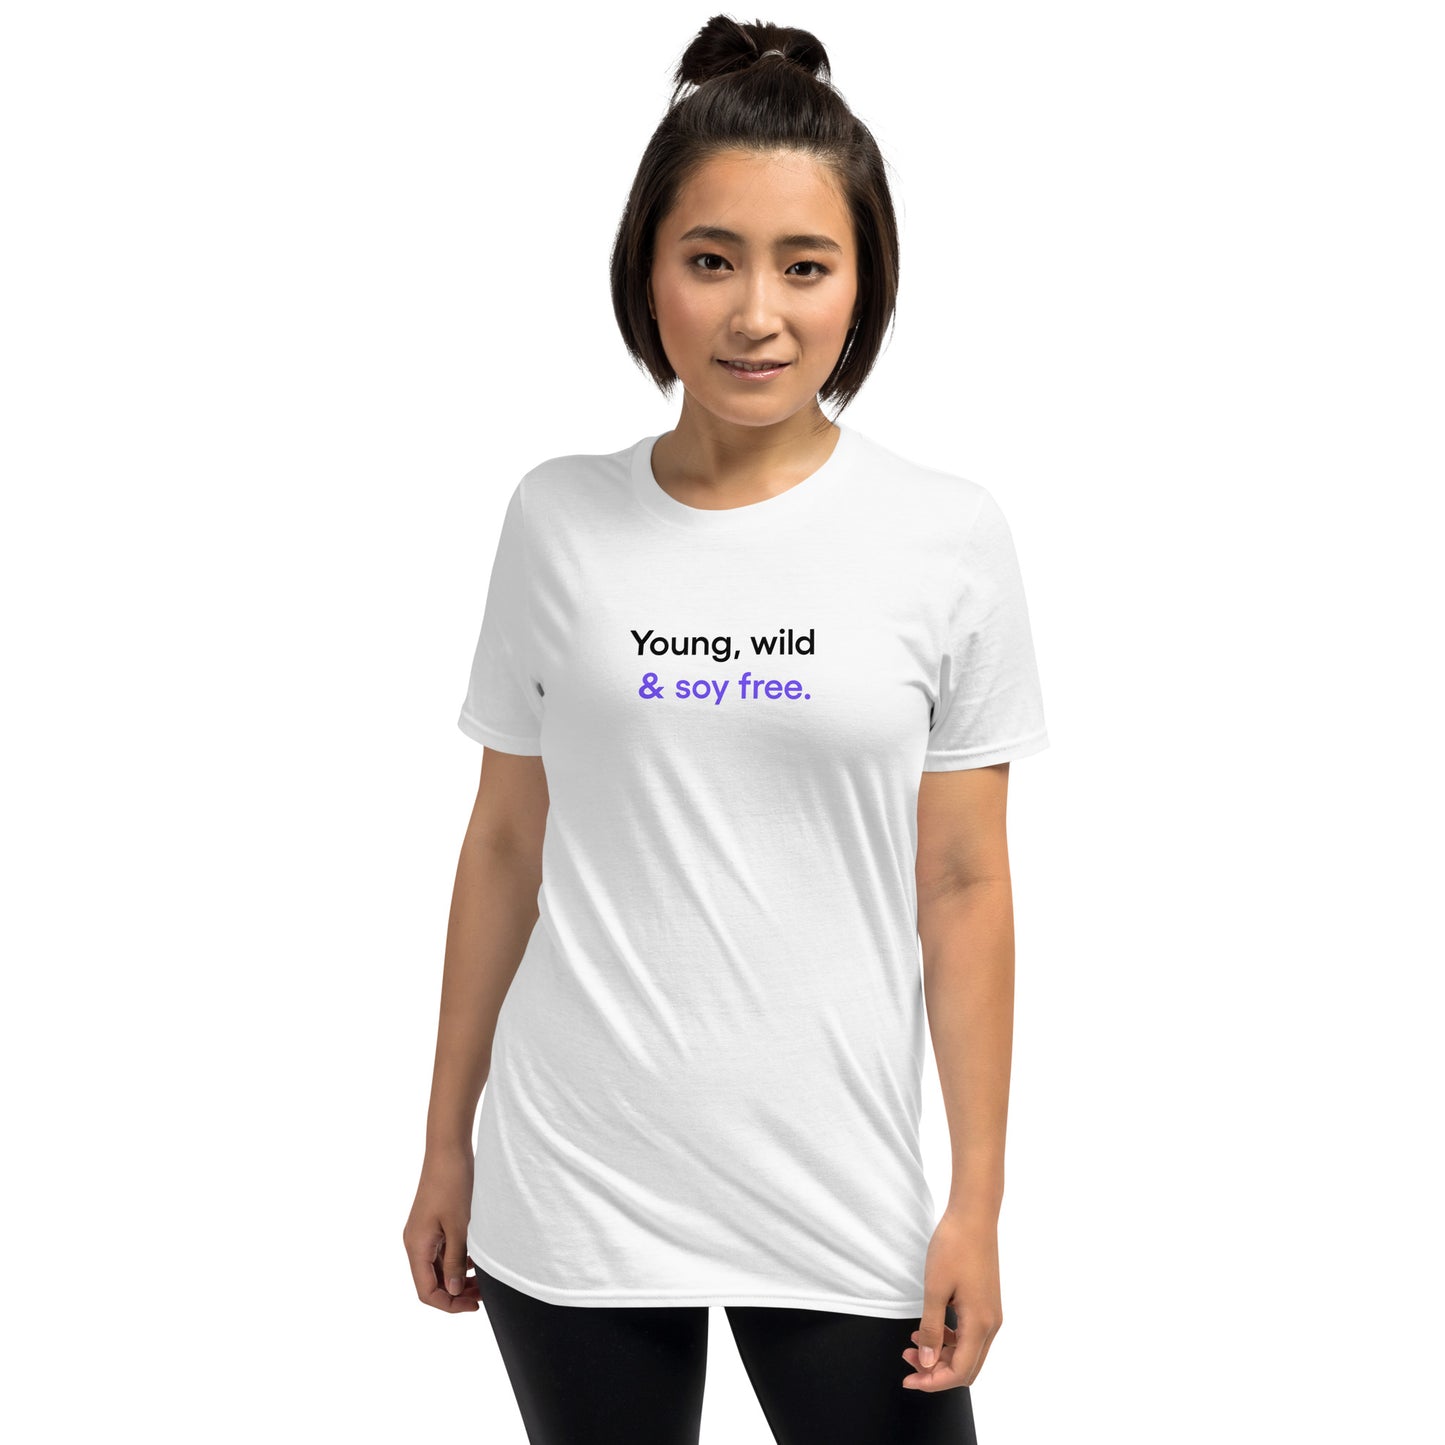 Young, wild & soy free | Short-Sleeve Unisex T-Shirt